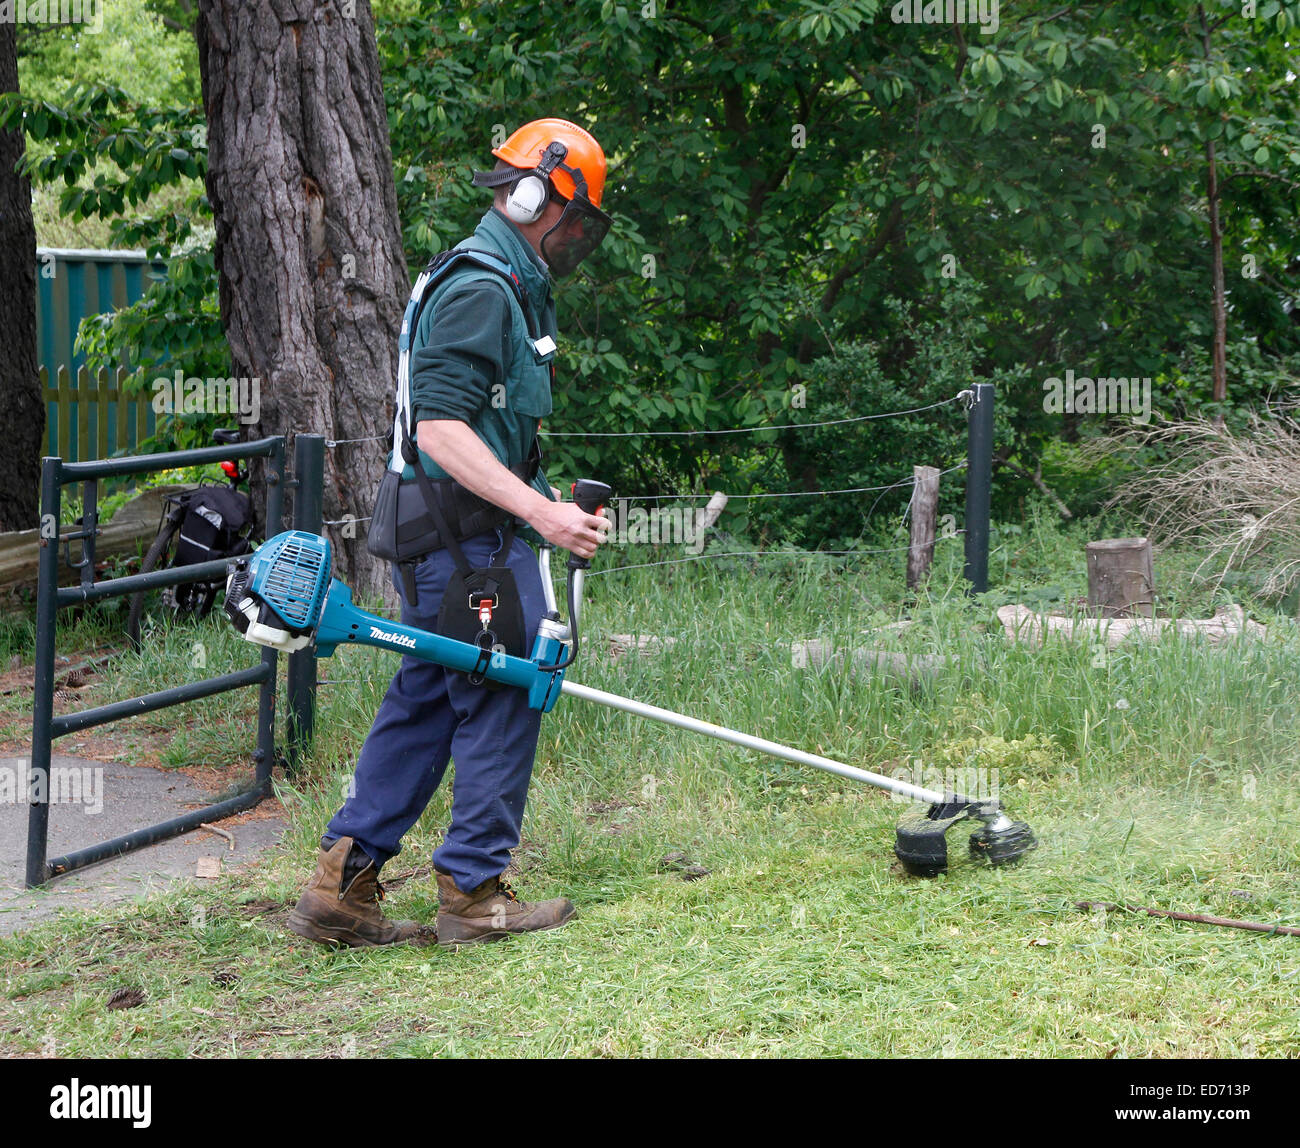 Cutting long rough grass with a petrol strimmer also called a 'weed eater' or 'weed-wacker.' Stock Photo